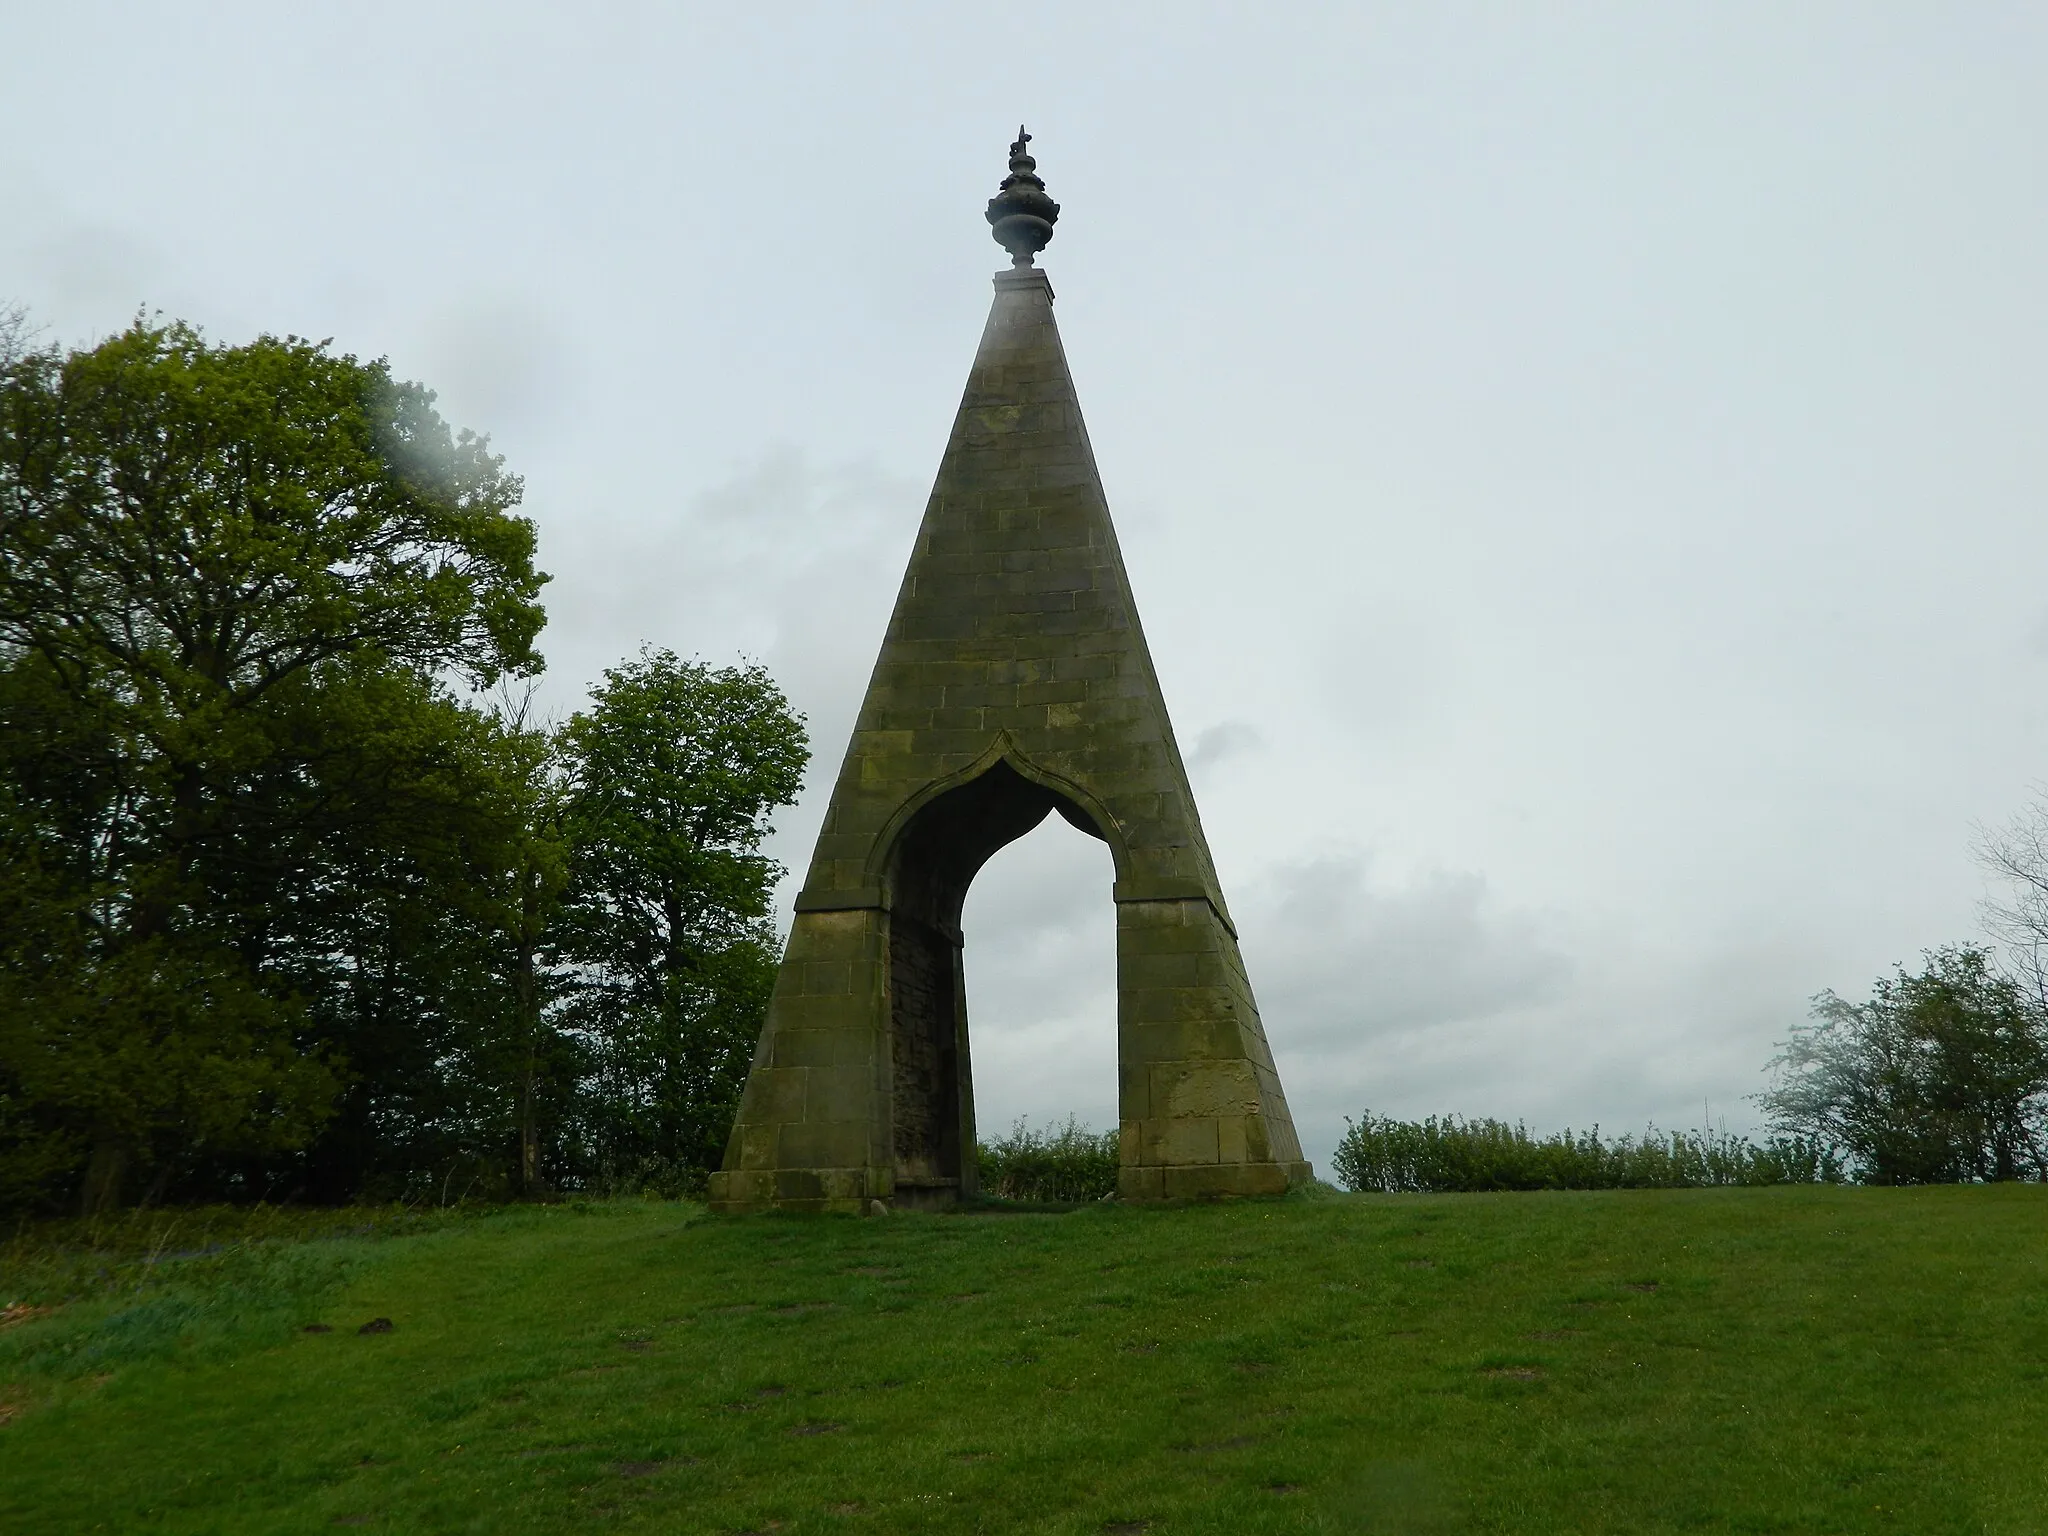 Photo showing: The Needle's Eye which is located in Wentworth, Rotherham, South Yorkshire.